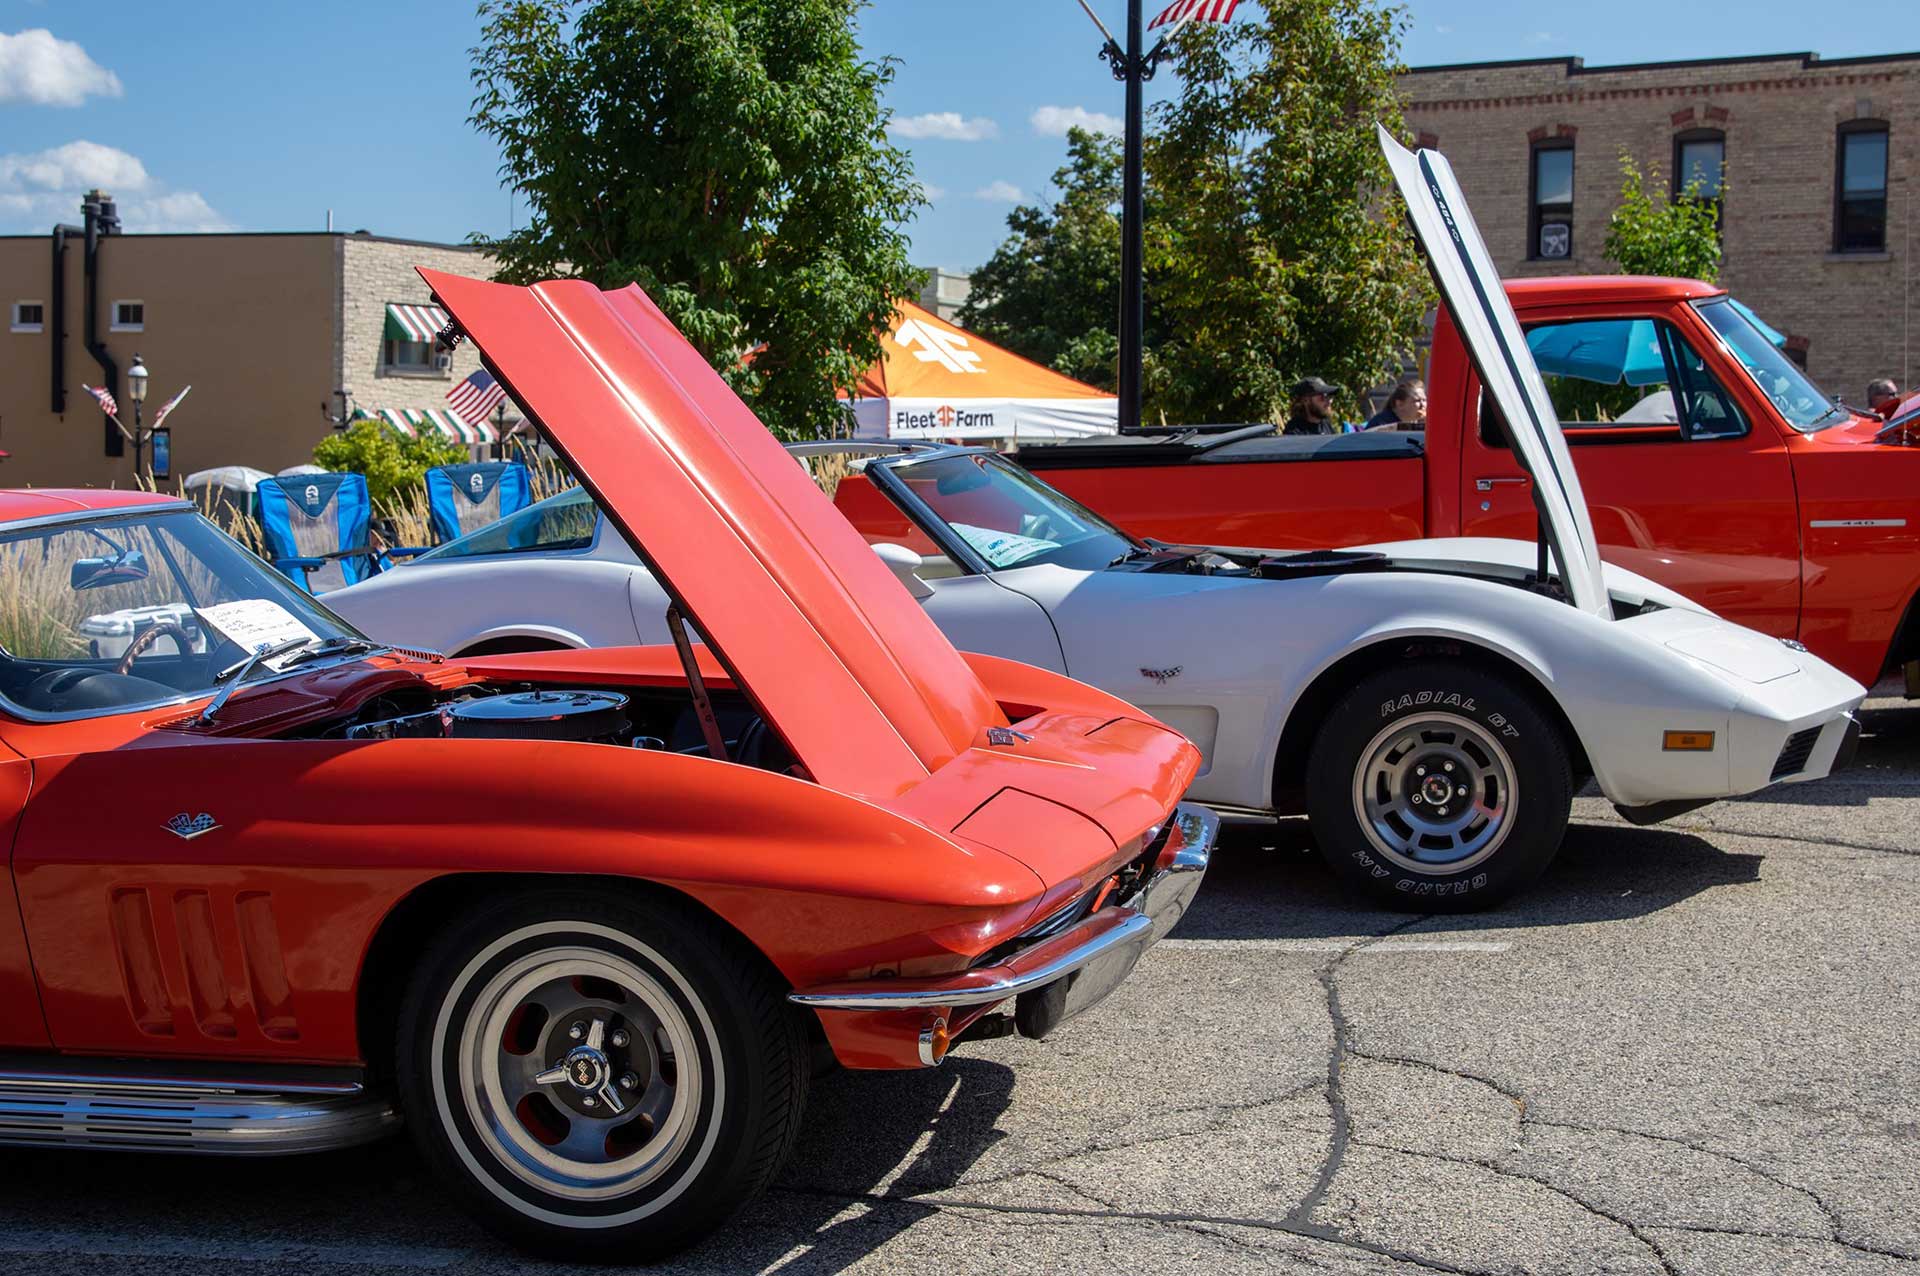 Several classic cars on display at Wheels On Main